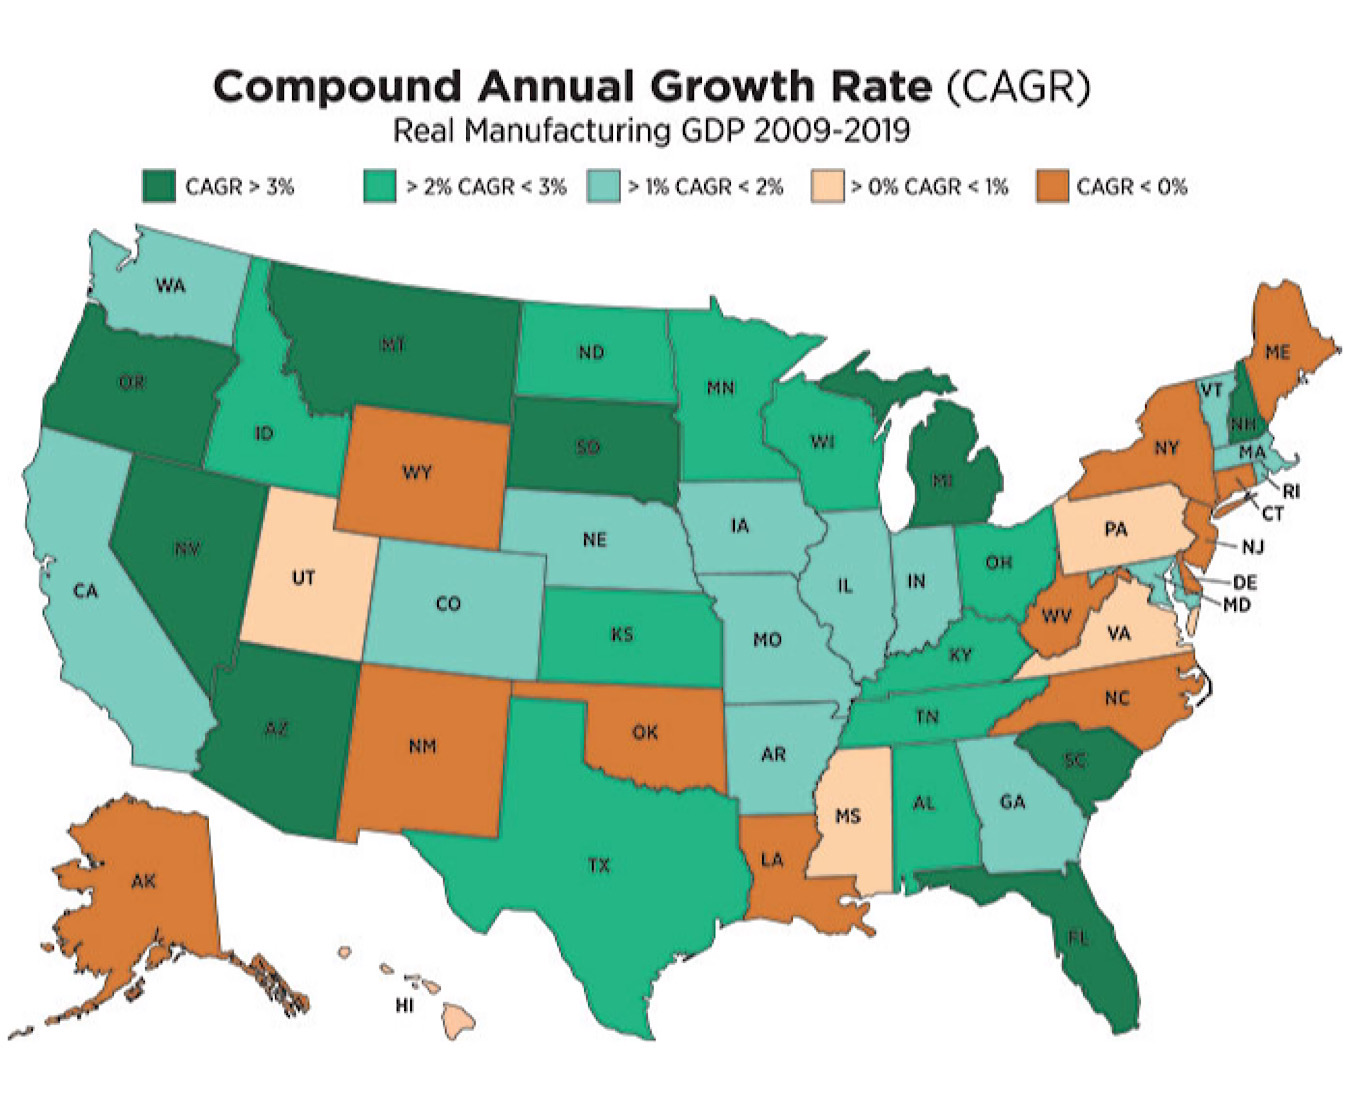 Image shows the Real Manufacturing GDP CAGR 2009-2019 from NIST and MEP data and shows one impact of manufacturers working with local MEP centers state by state